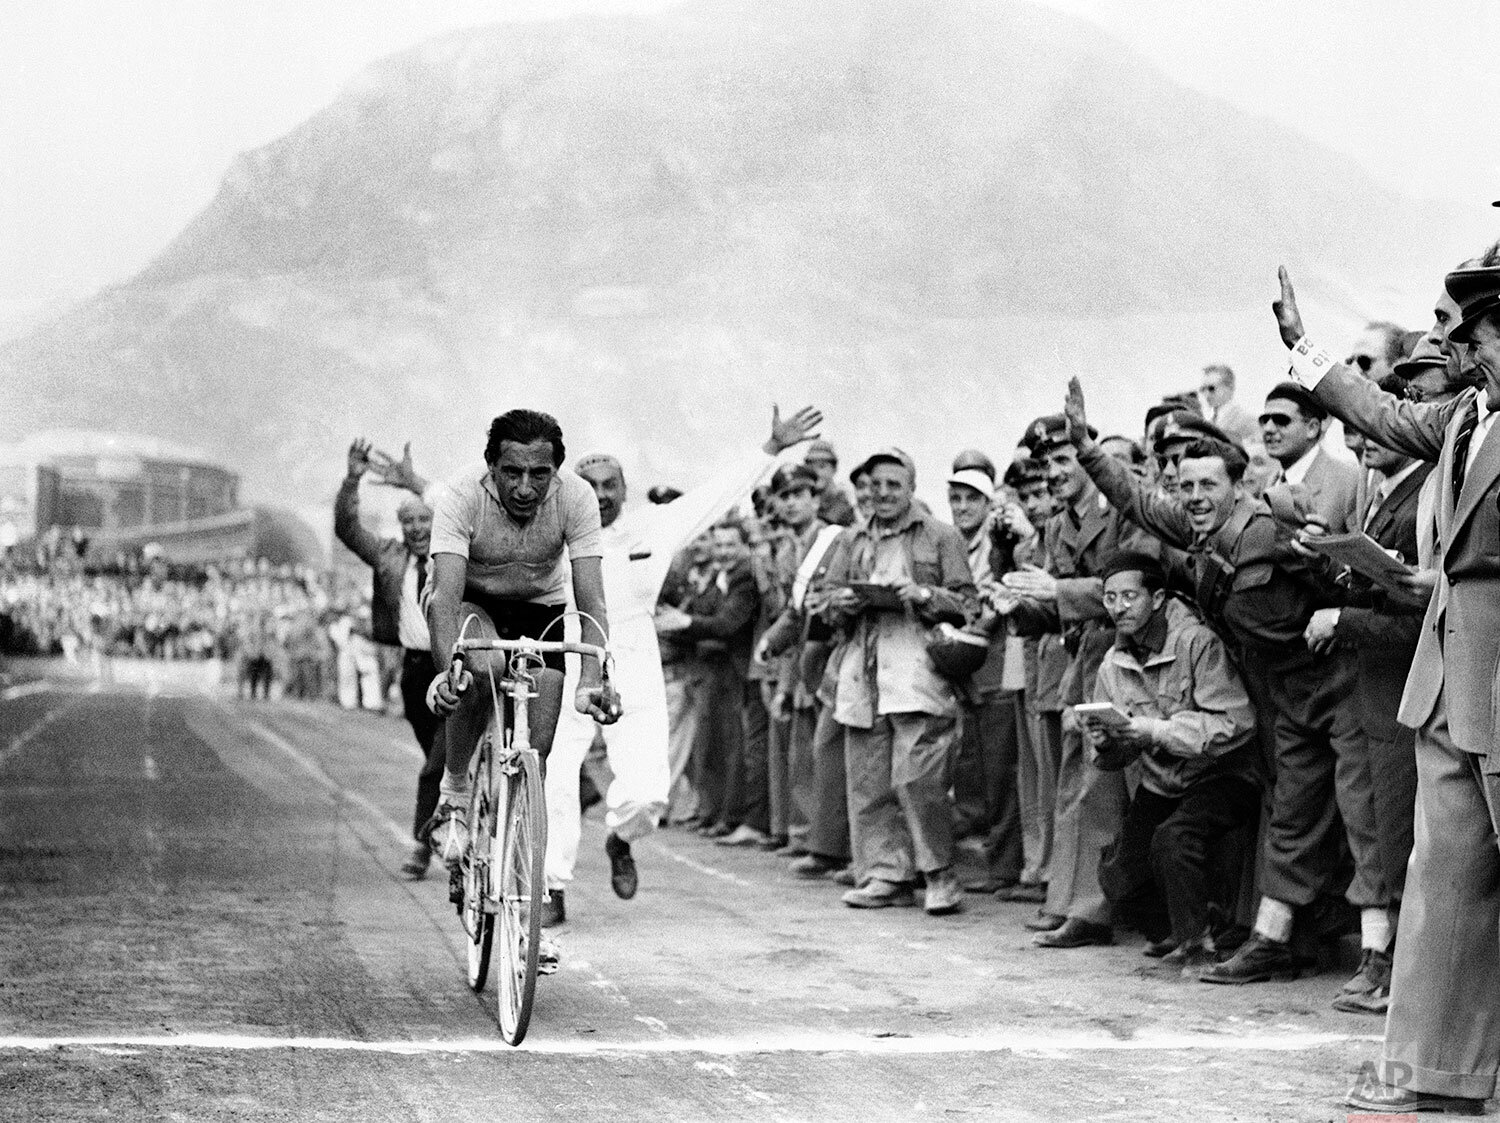  Italy's Fausto Coppi, finishing the seventeenth lap of the bicycle race across Italy, on June 5, 1952. The lap was from San Remo to Cuneo a distance of 190 kilometers. The winner was Nino De Filippis. Coppi finished in a group, two minutes, nine sec